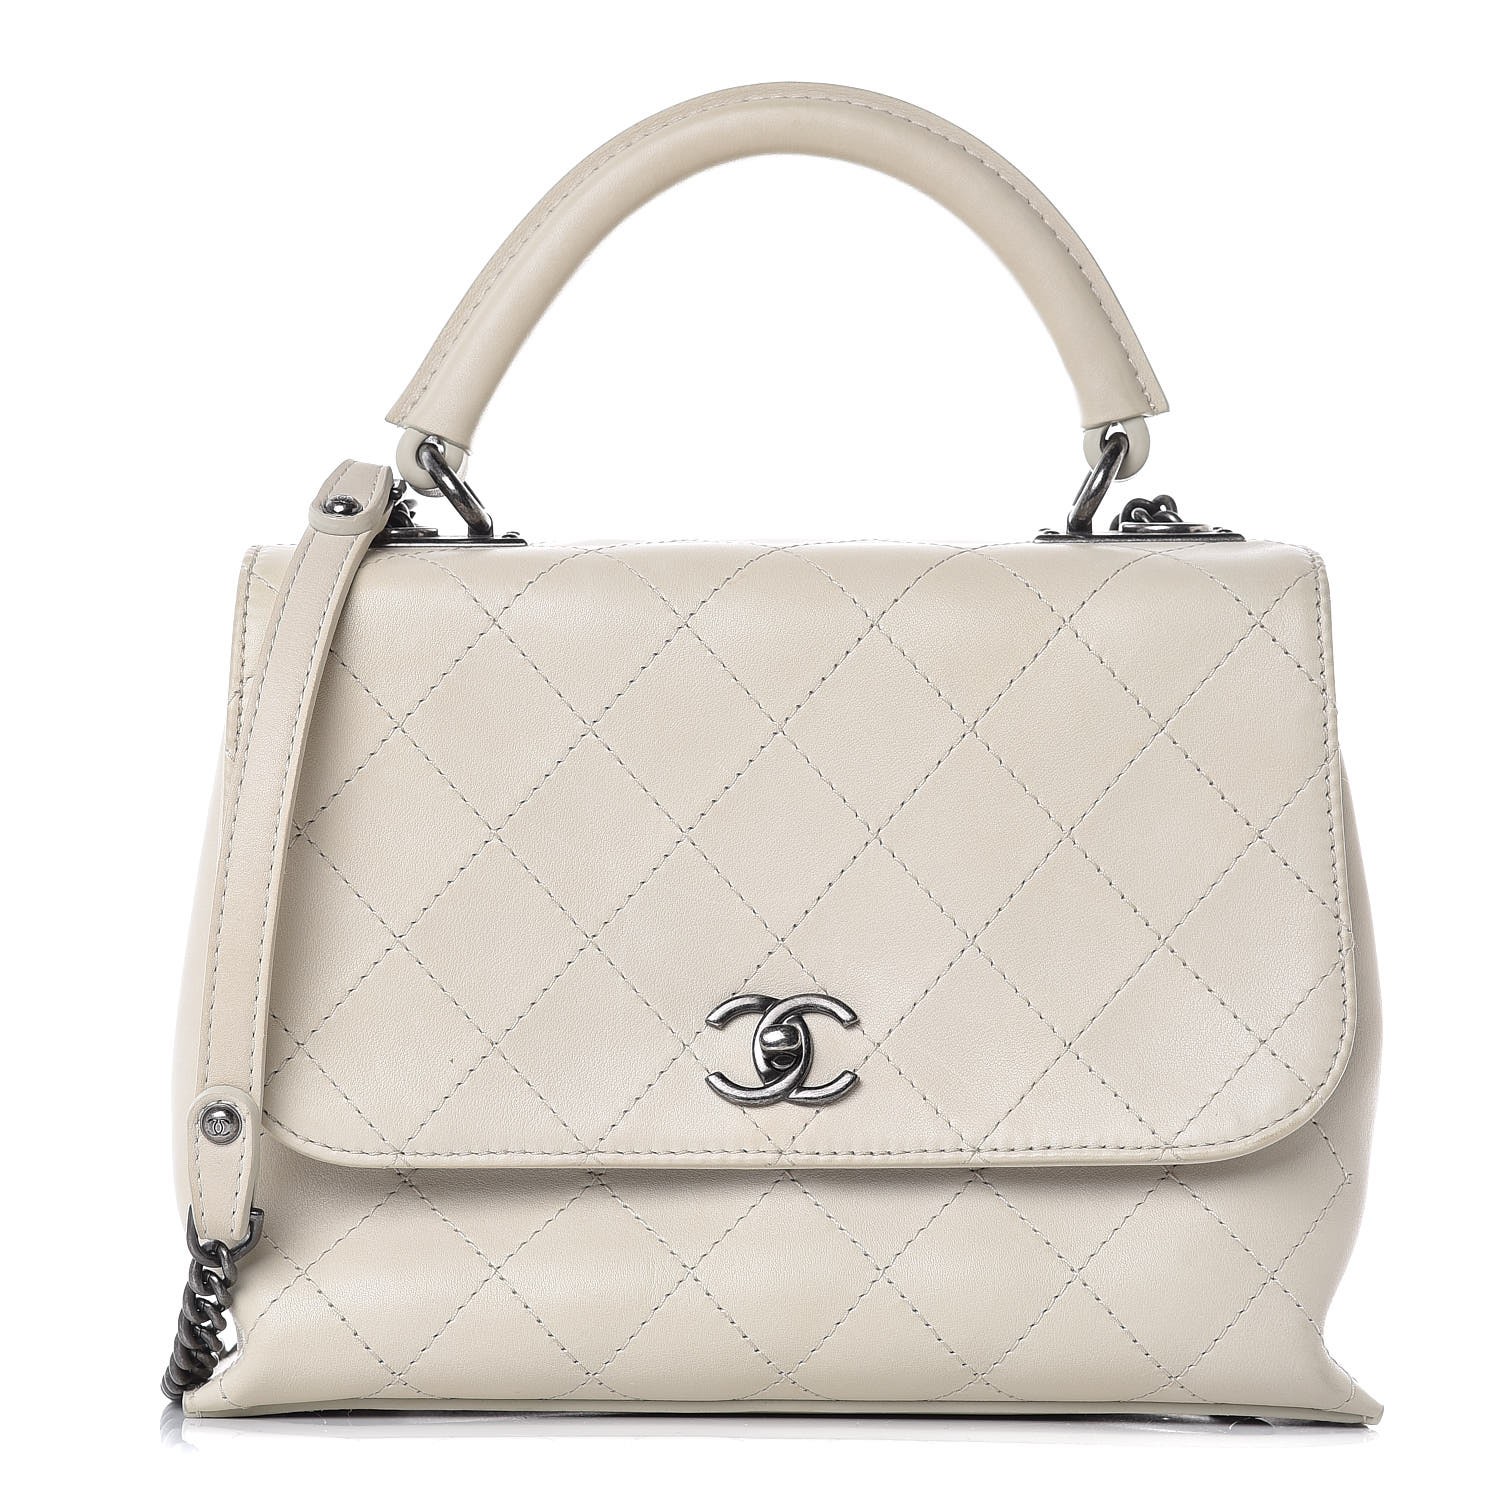 CHANEL Calfskin Stitched Urban Luxury Top Handle Bag Ivory 352282 ...